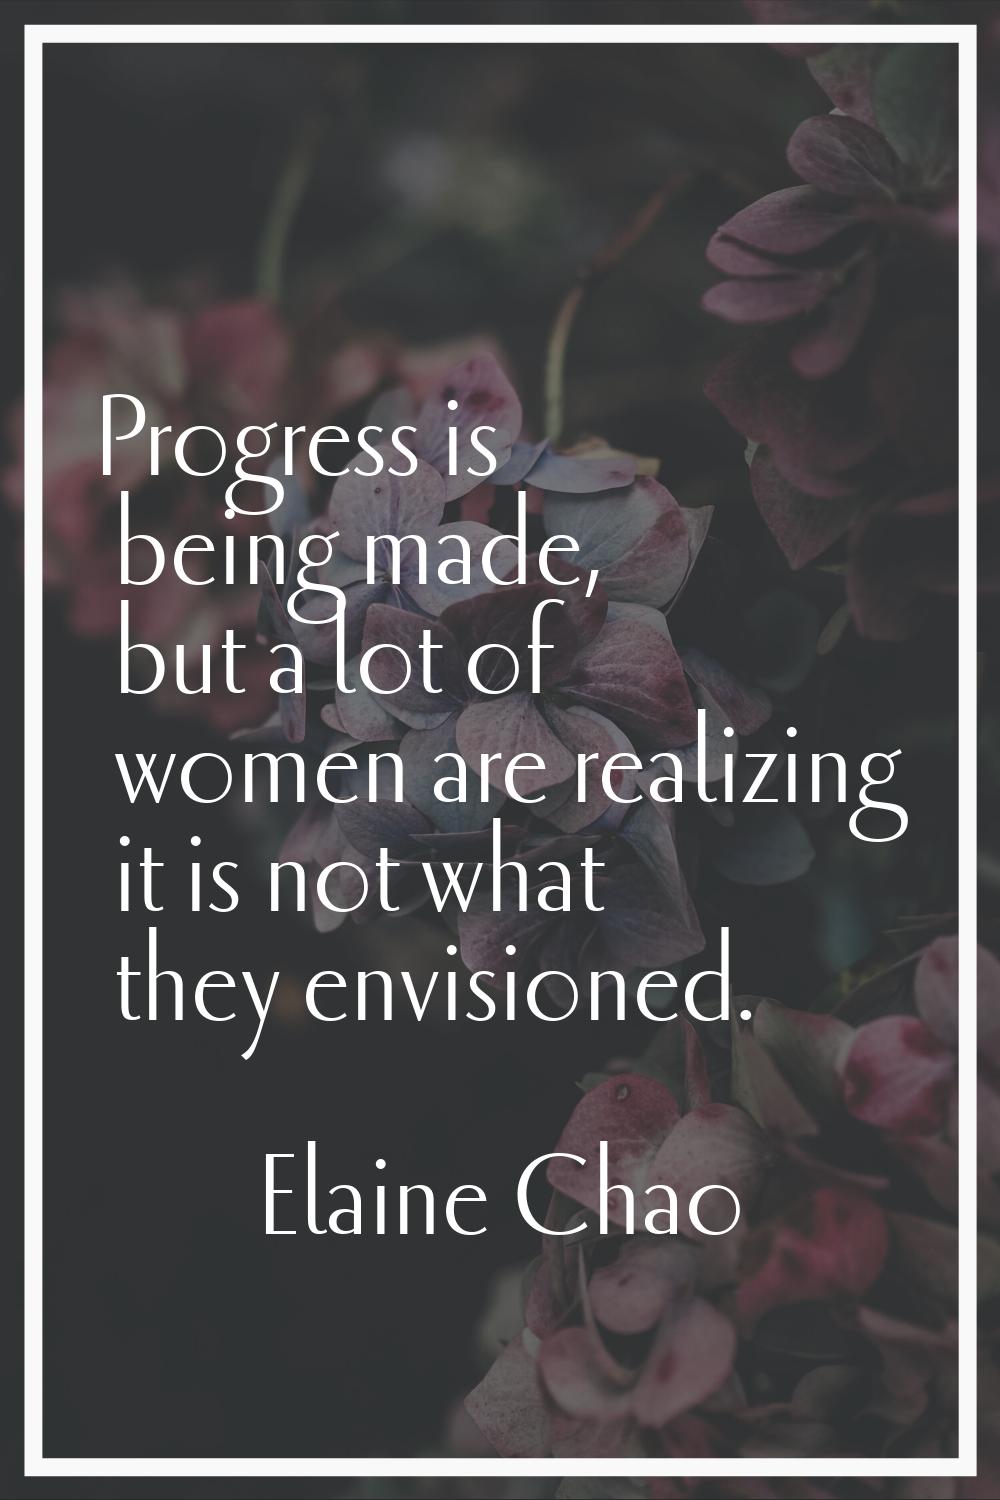 Progress is being made, but a lot of women are realizing it is not what they envisioned.